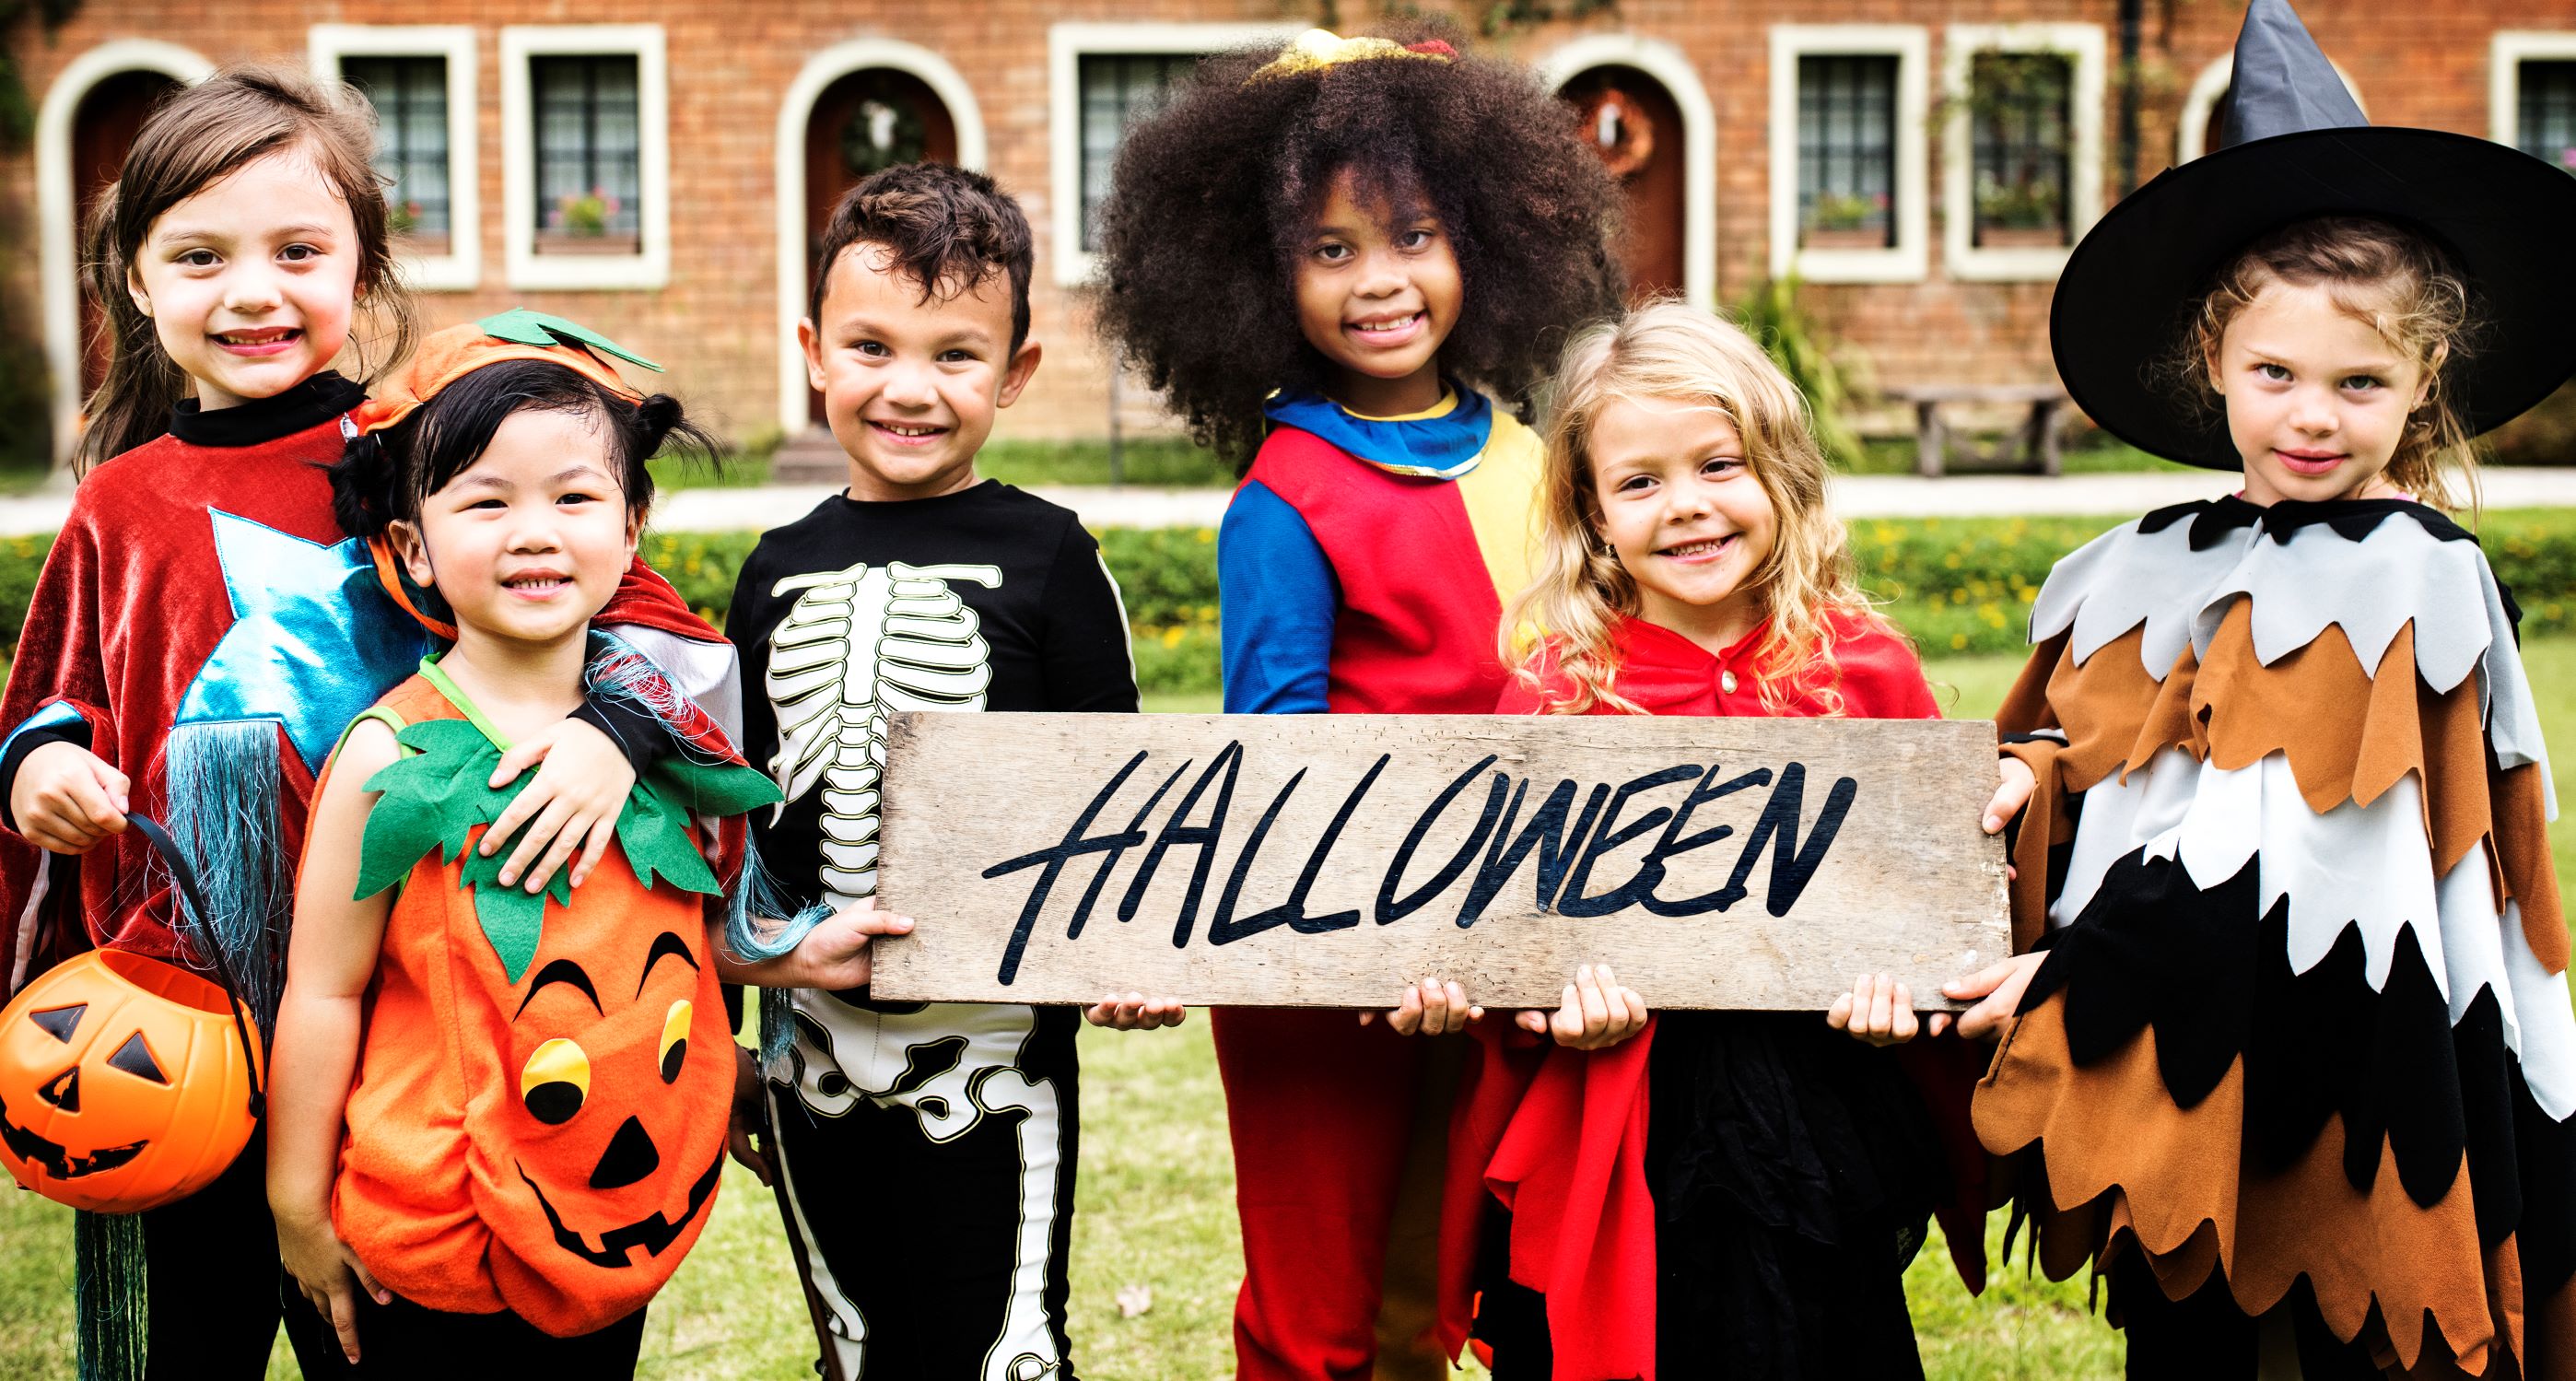 Children dressed in Halloween costumes holding a sign saying Halloween.